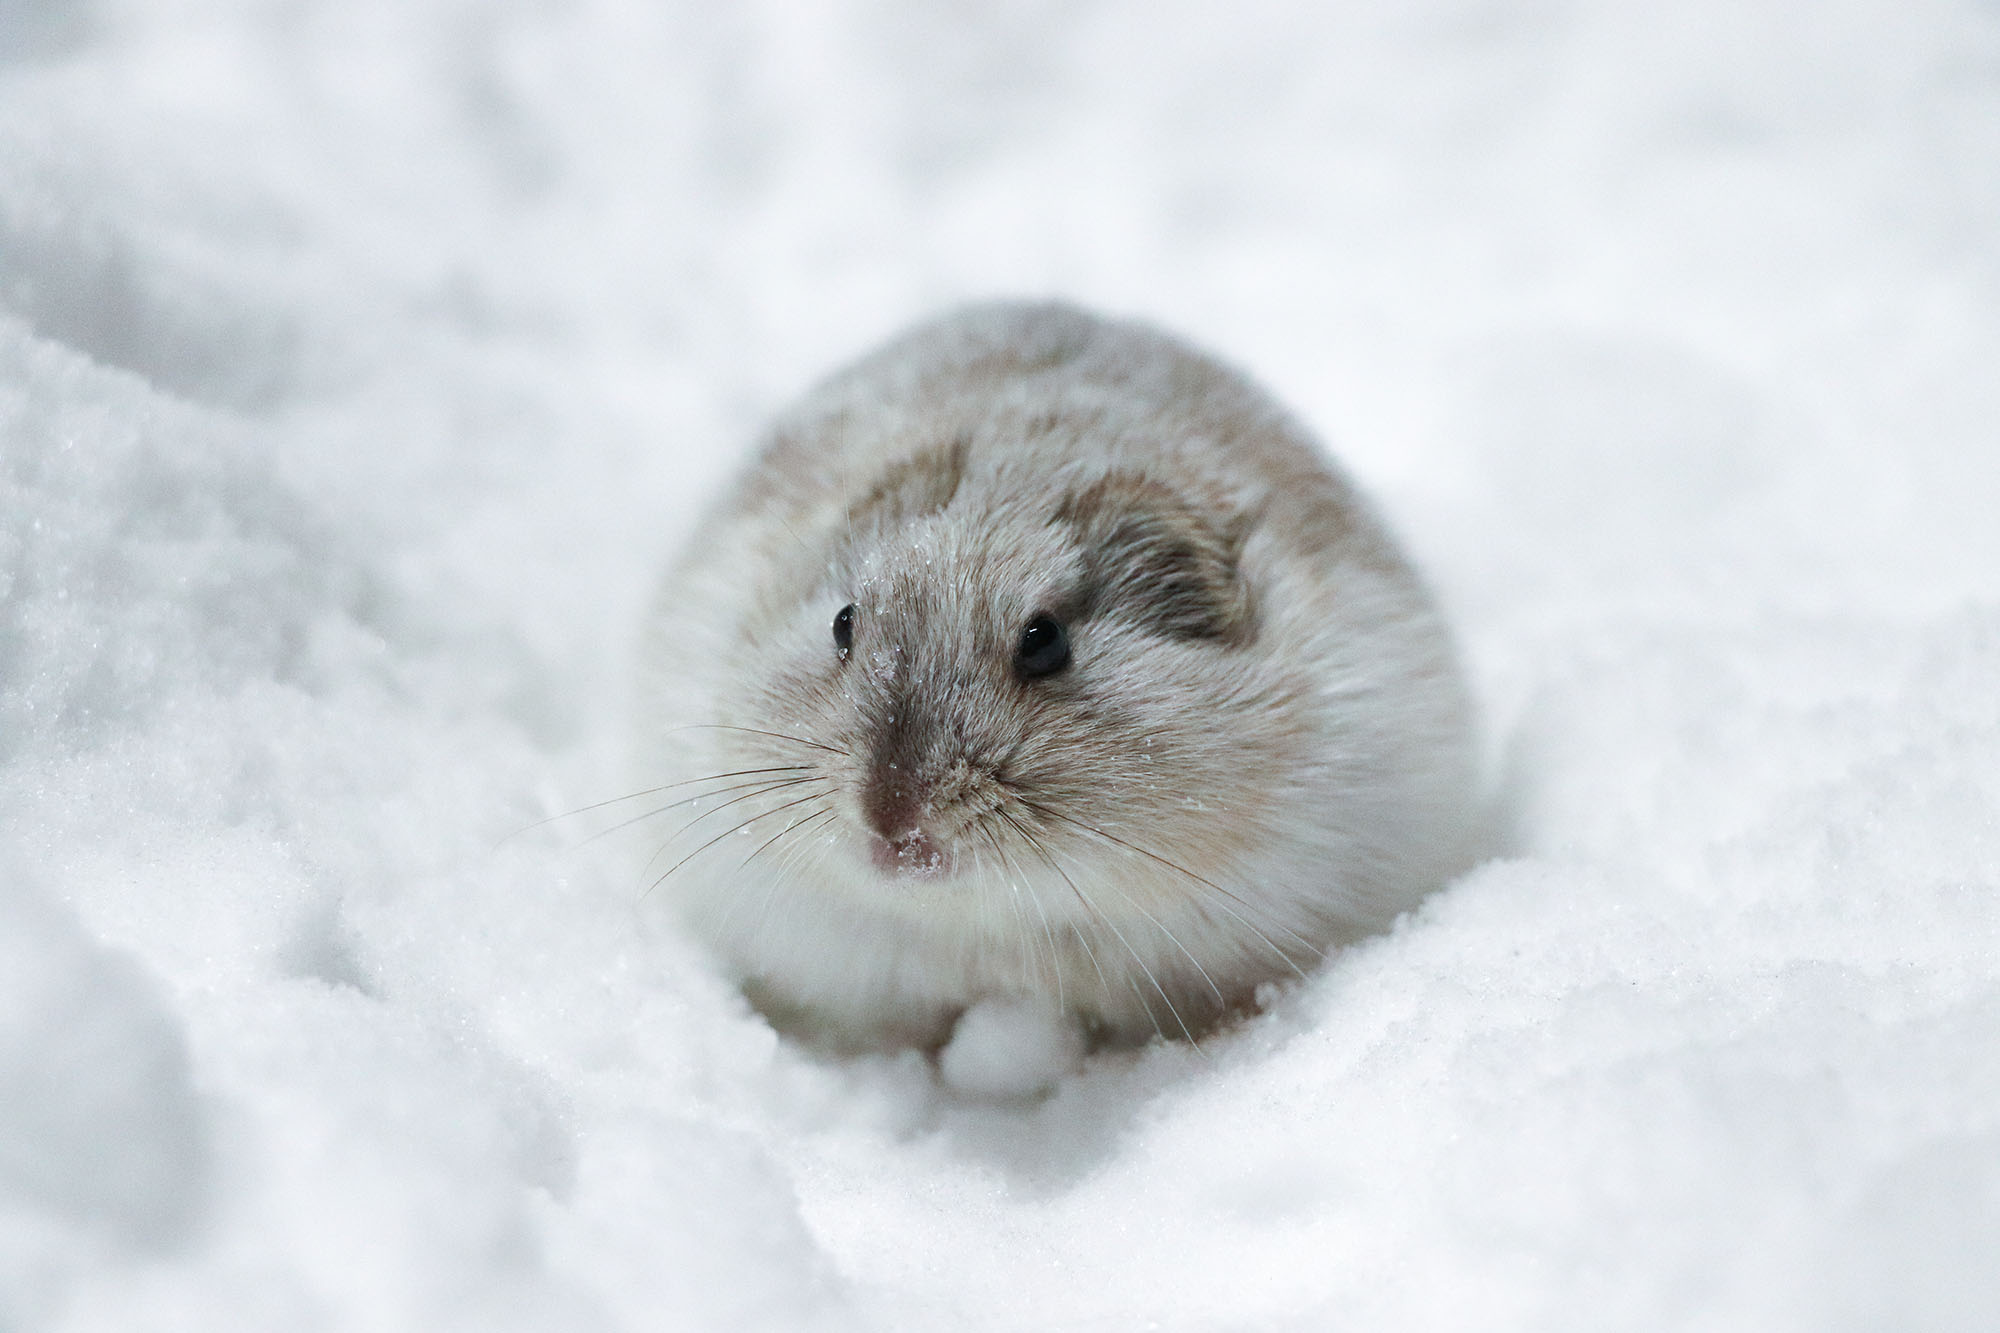 Collared lemming